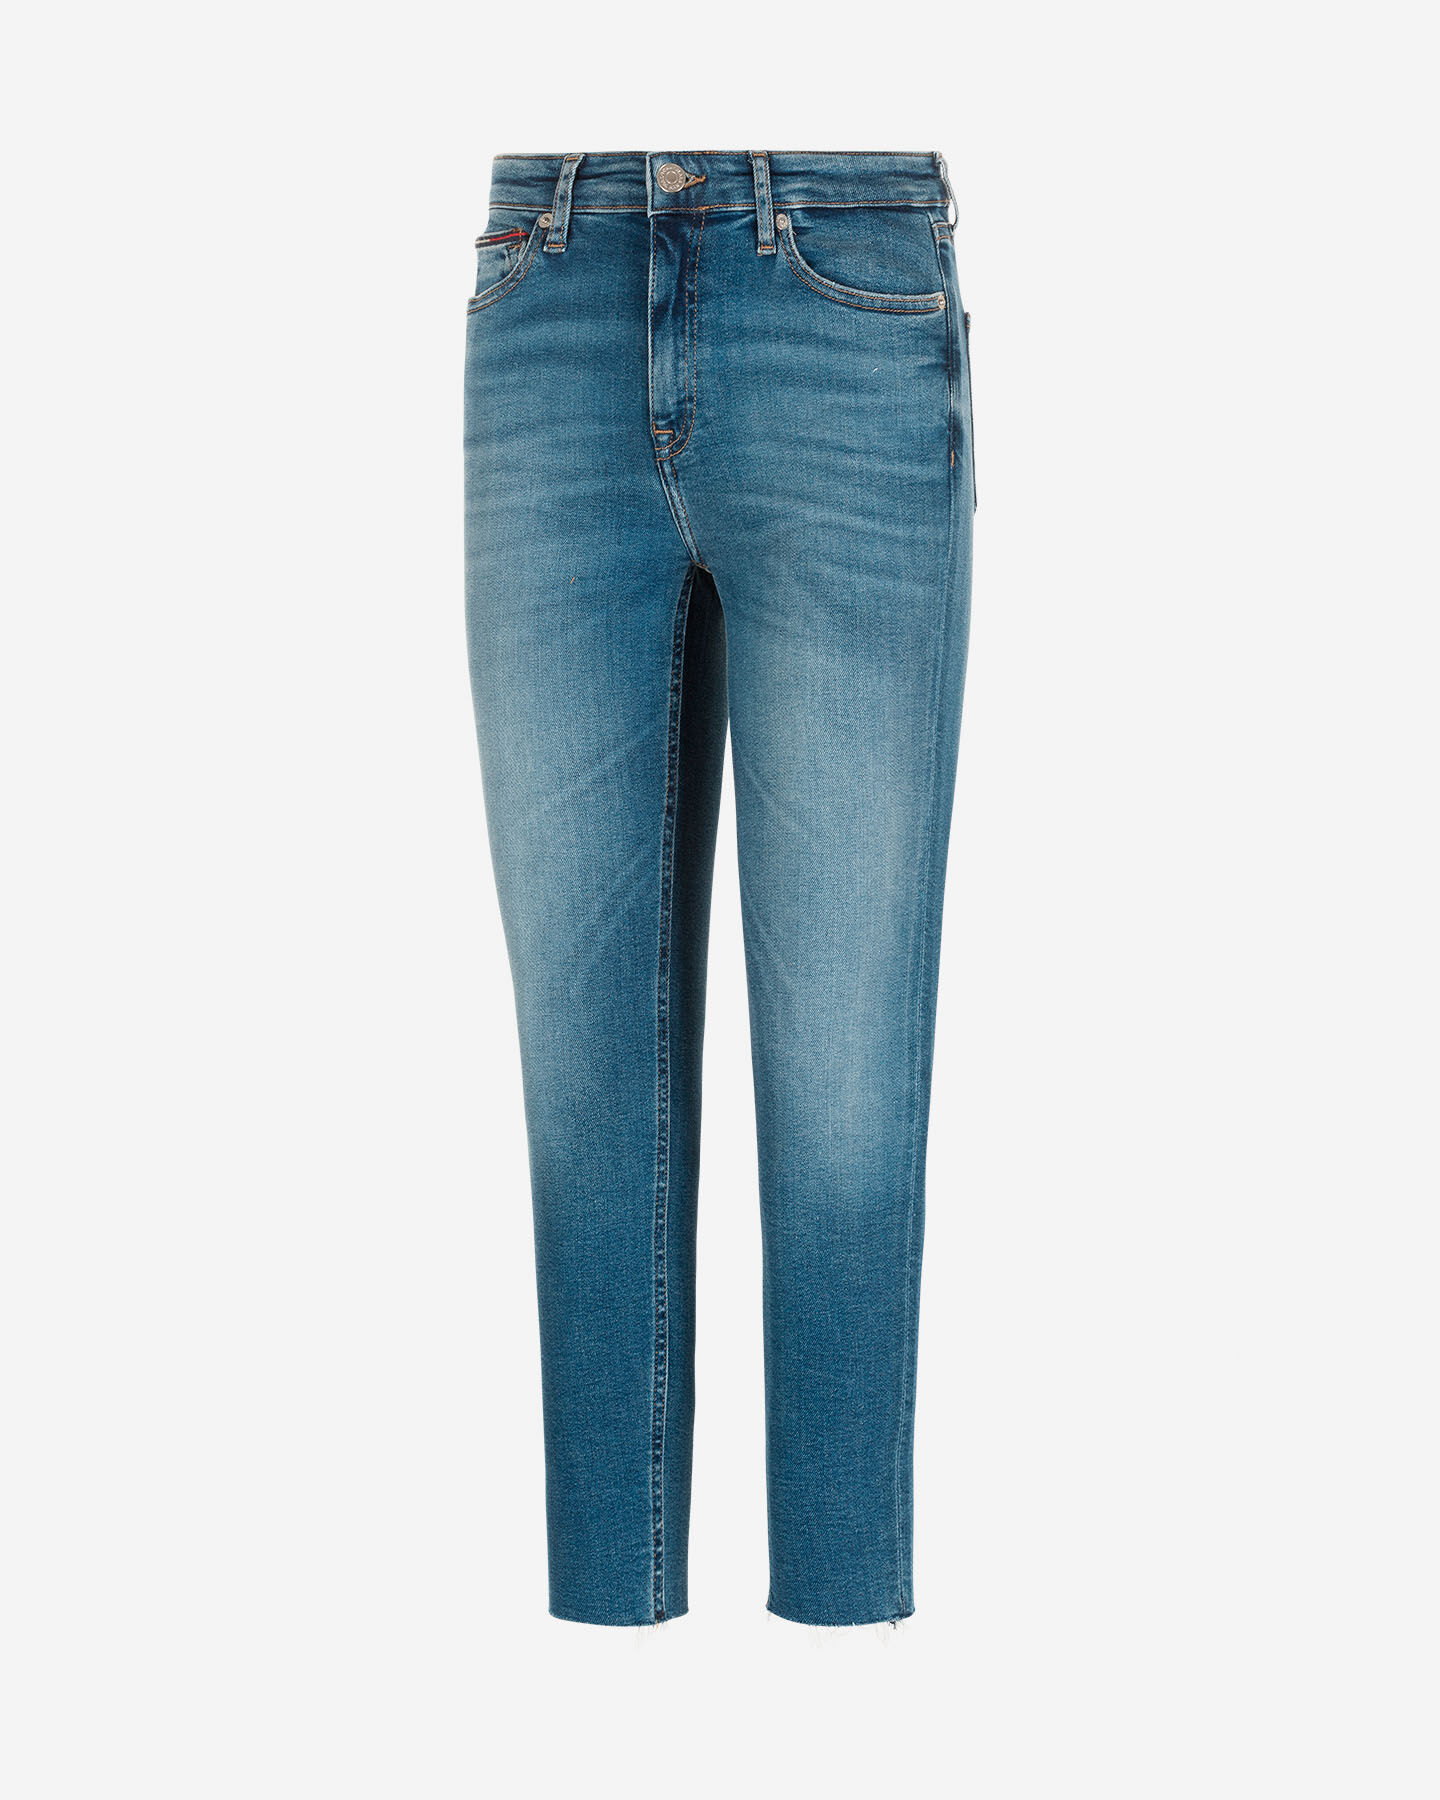  Jeans TOMMY HILFIGER NORA SKINNY MID W S4089044|1A5|27 scatto 0